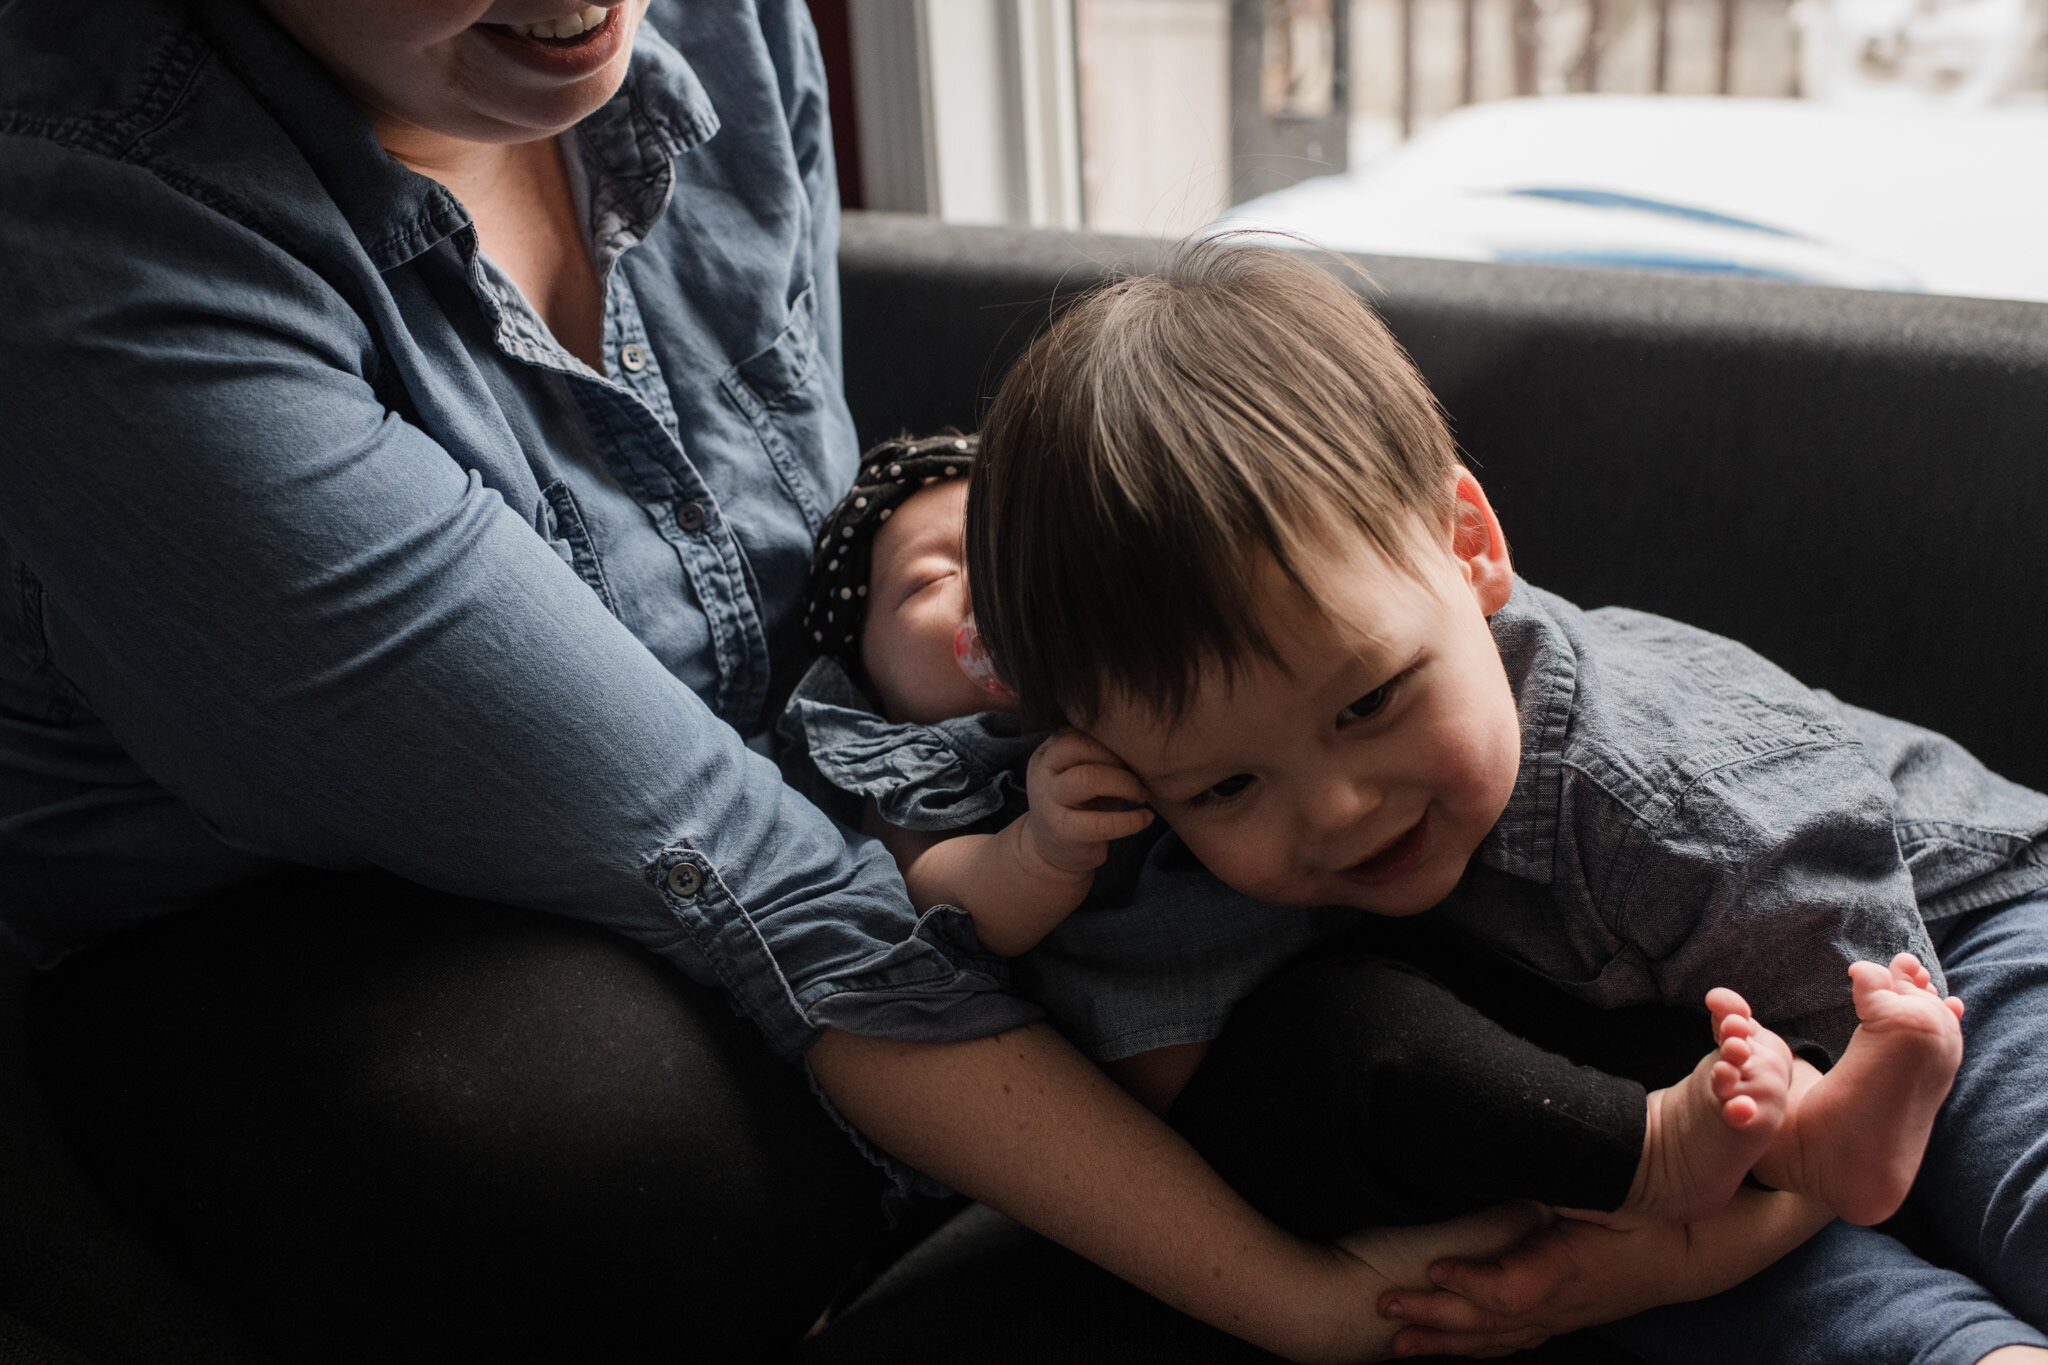 956-toddler-having-fun-at-family-photo-session-at-home-documentary-photoshoot-toronto.jpg